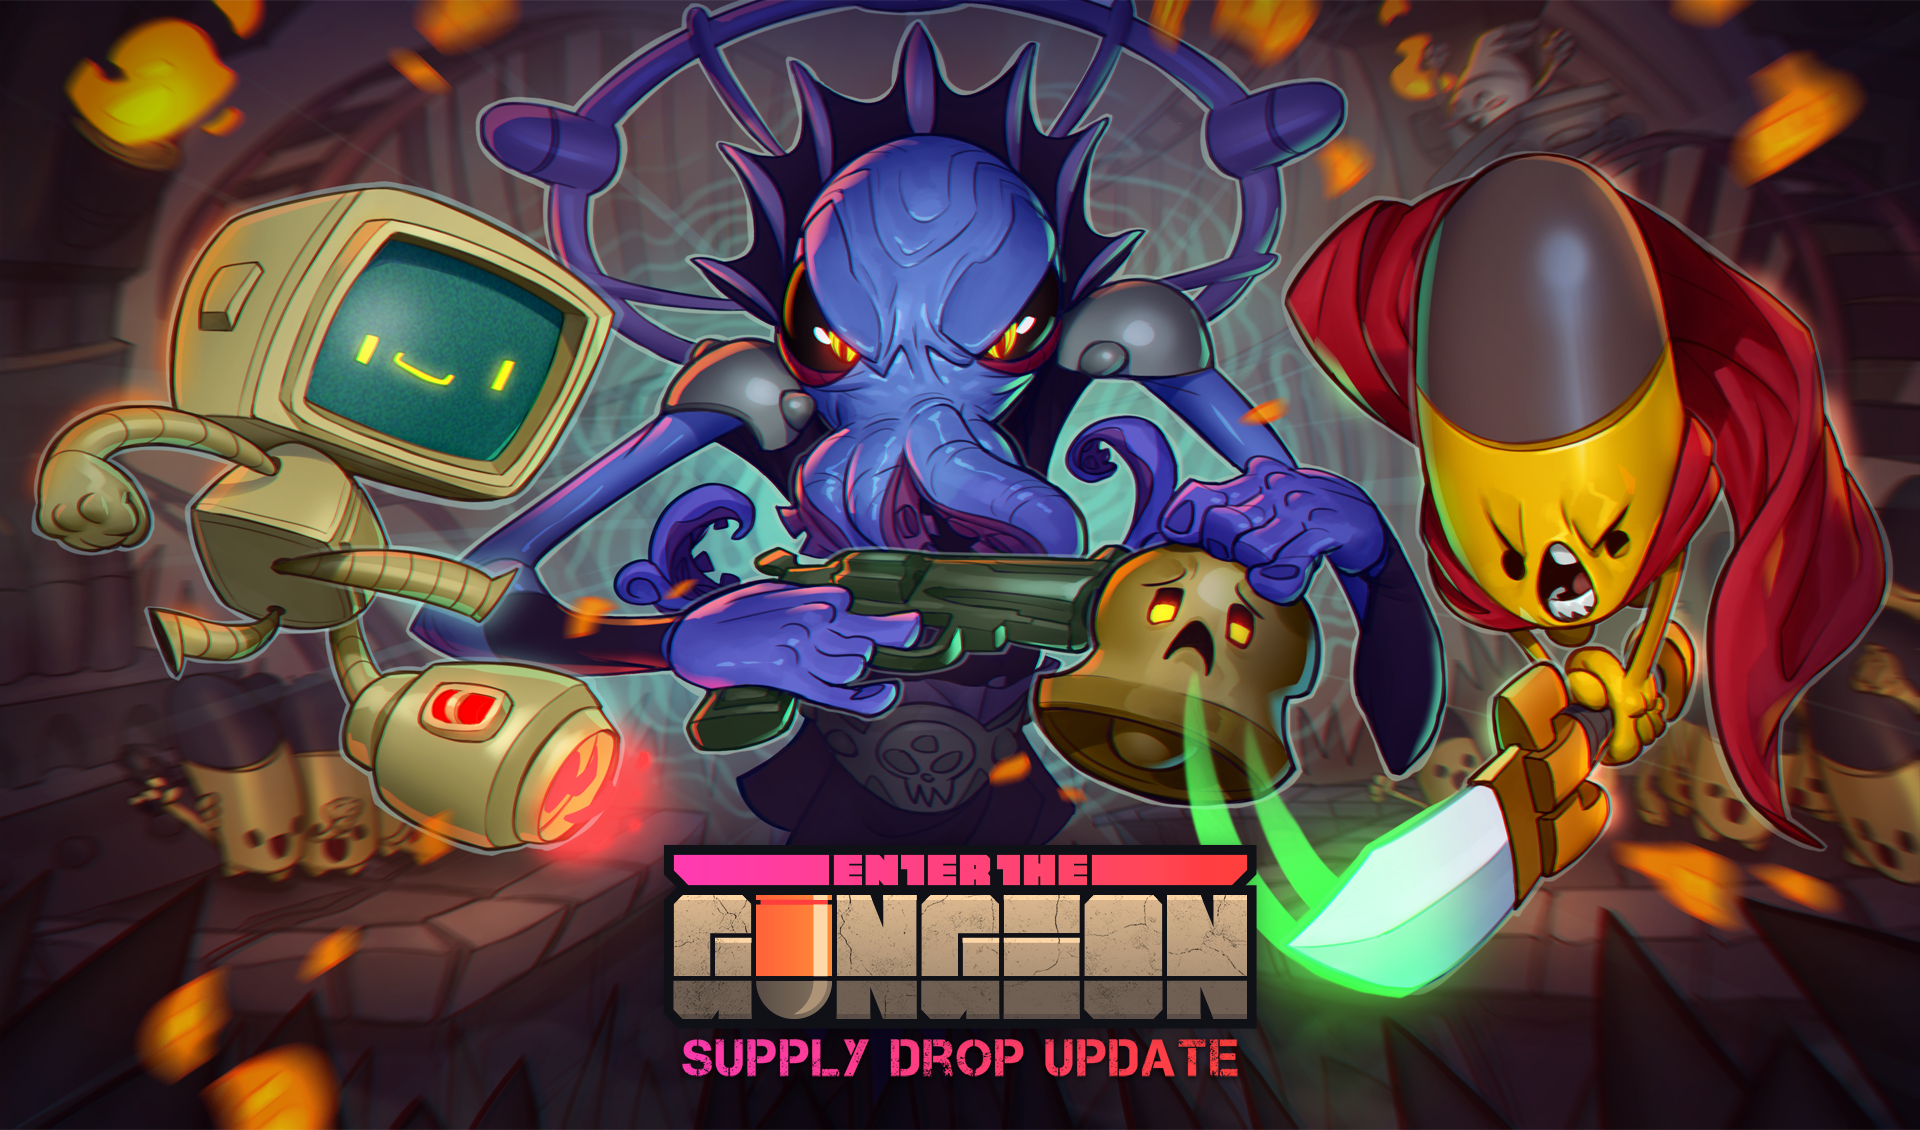 Steam :: Enter the Gungeon :: Announcing the Supply Drop Update, Coming  This Fall